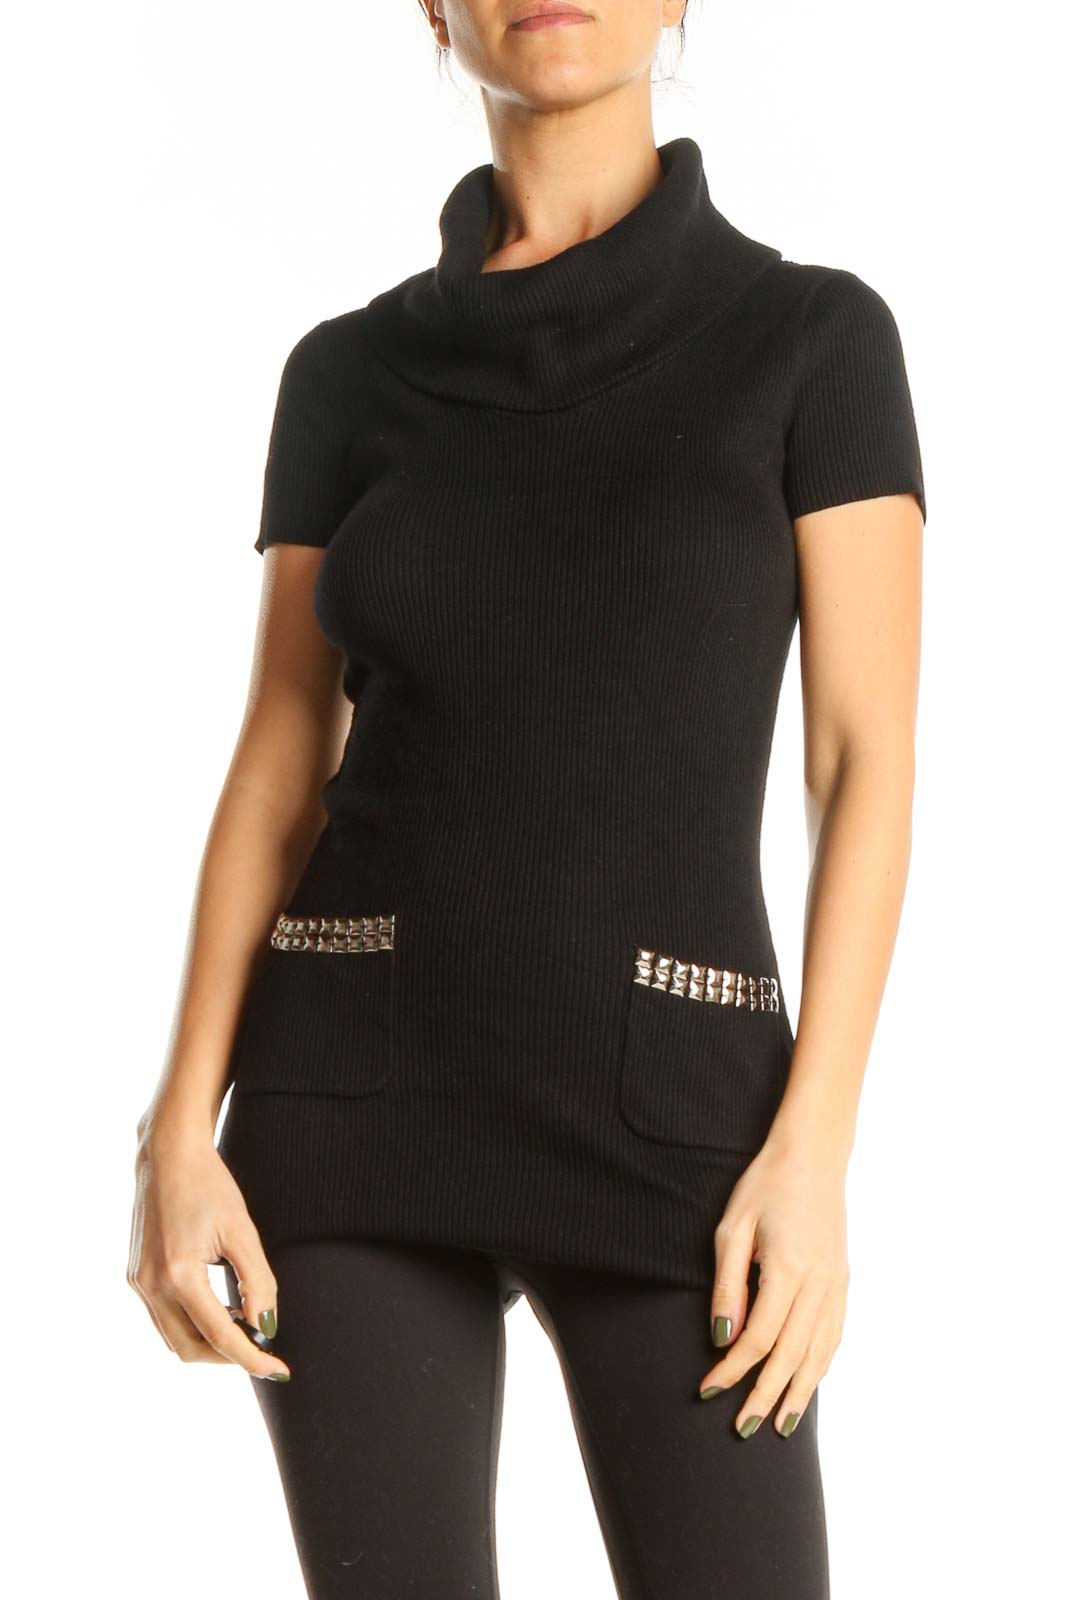 Black Turtle Neck Sweater Front